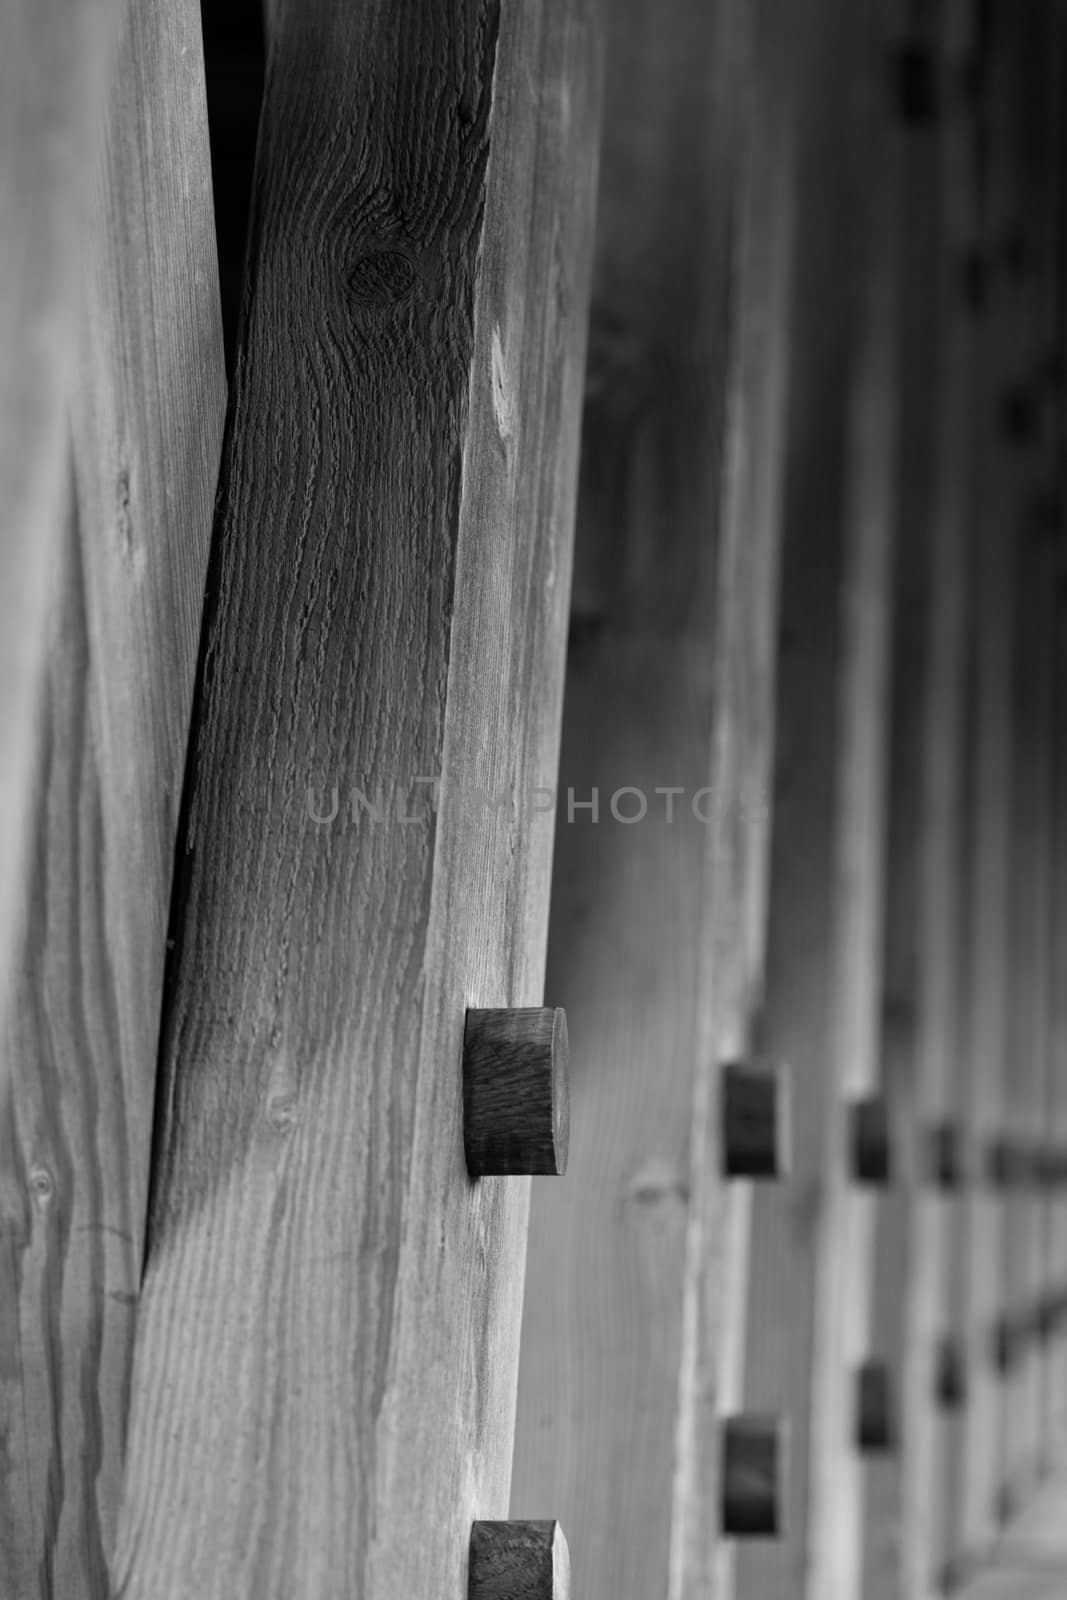 the lumber used to build an covered bridge close up of the detail, then fading to blur